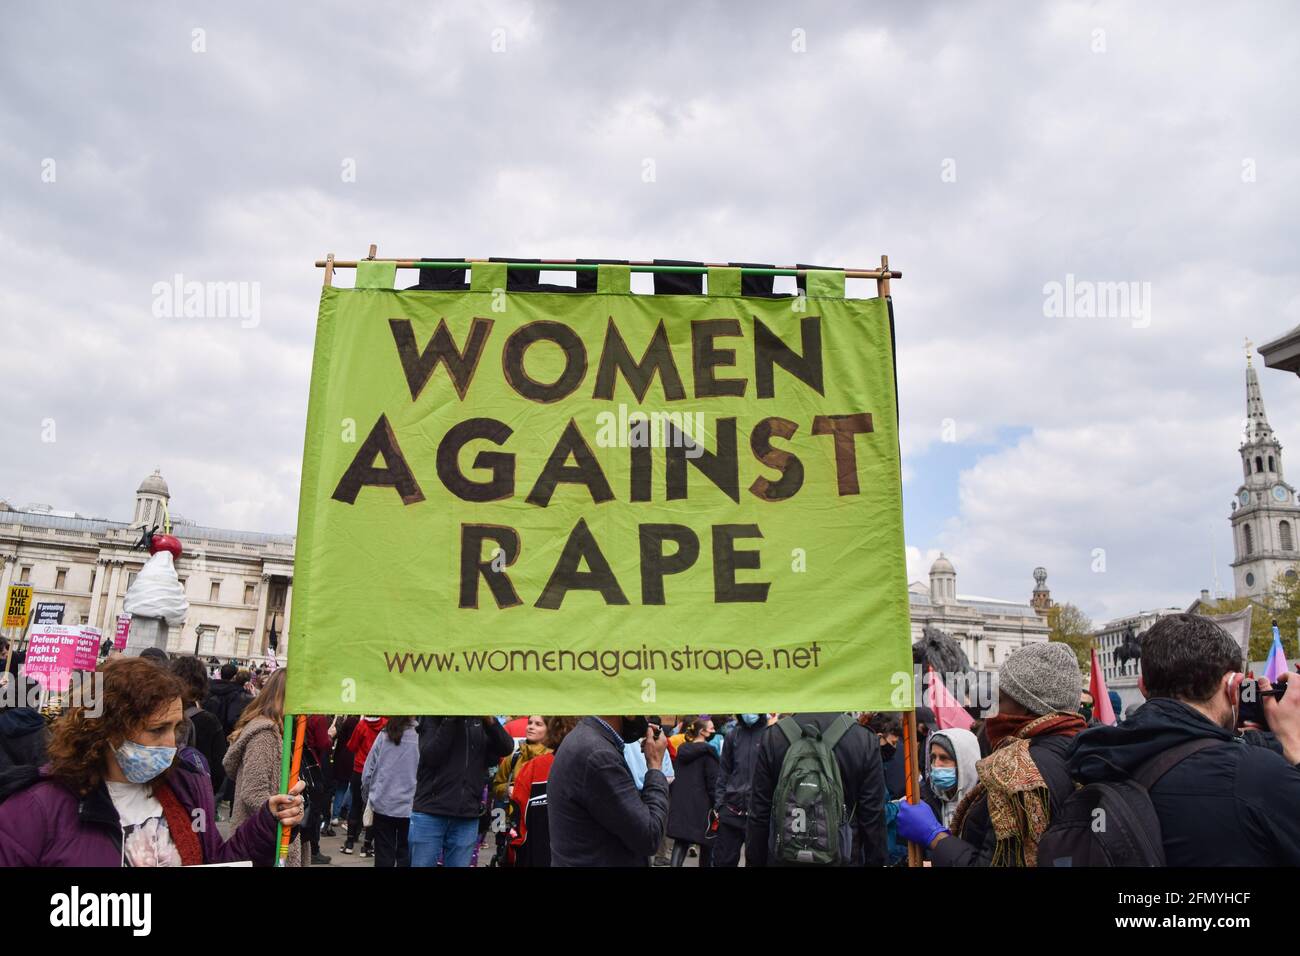 London, United Kingdom. 1st May 2021. Kill The Bill protest at Trafalgar Square. Thousands of people marched through Central London in protest against the Police, Crime, Sentencing and Courts Bill. Stock Photo